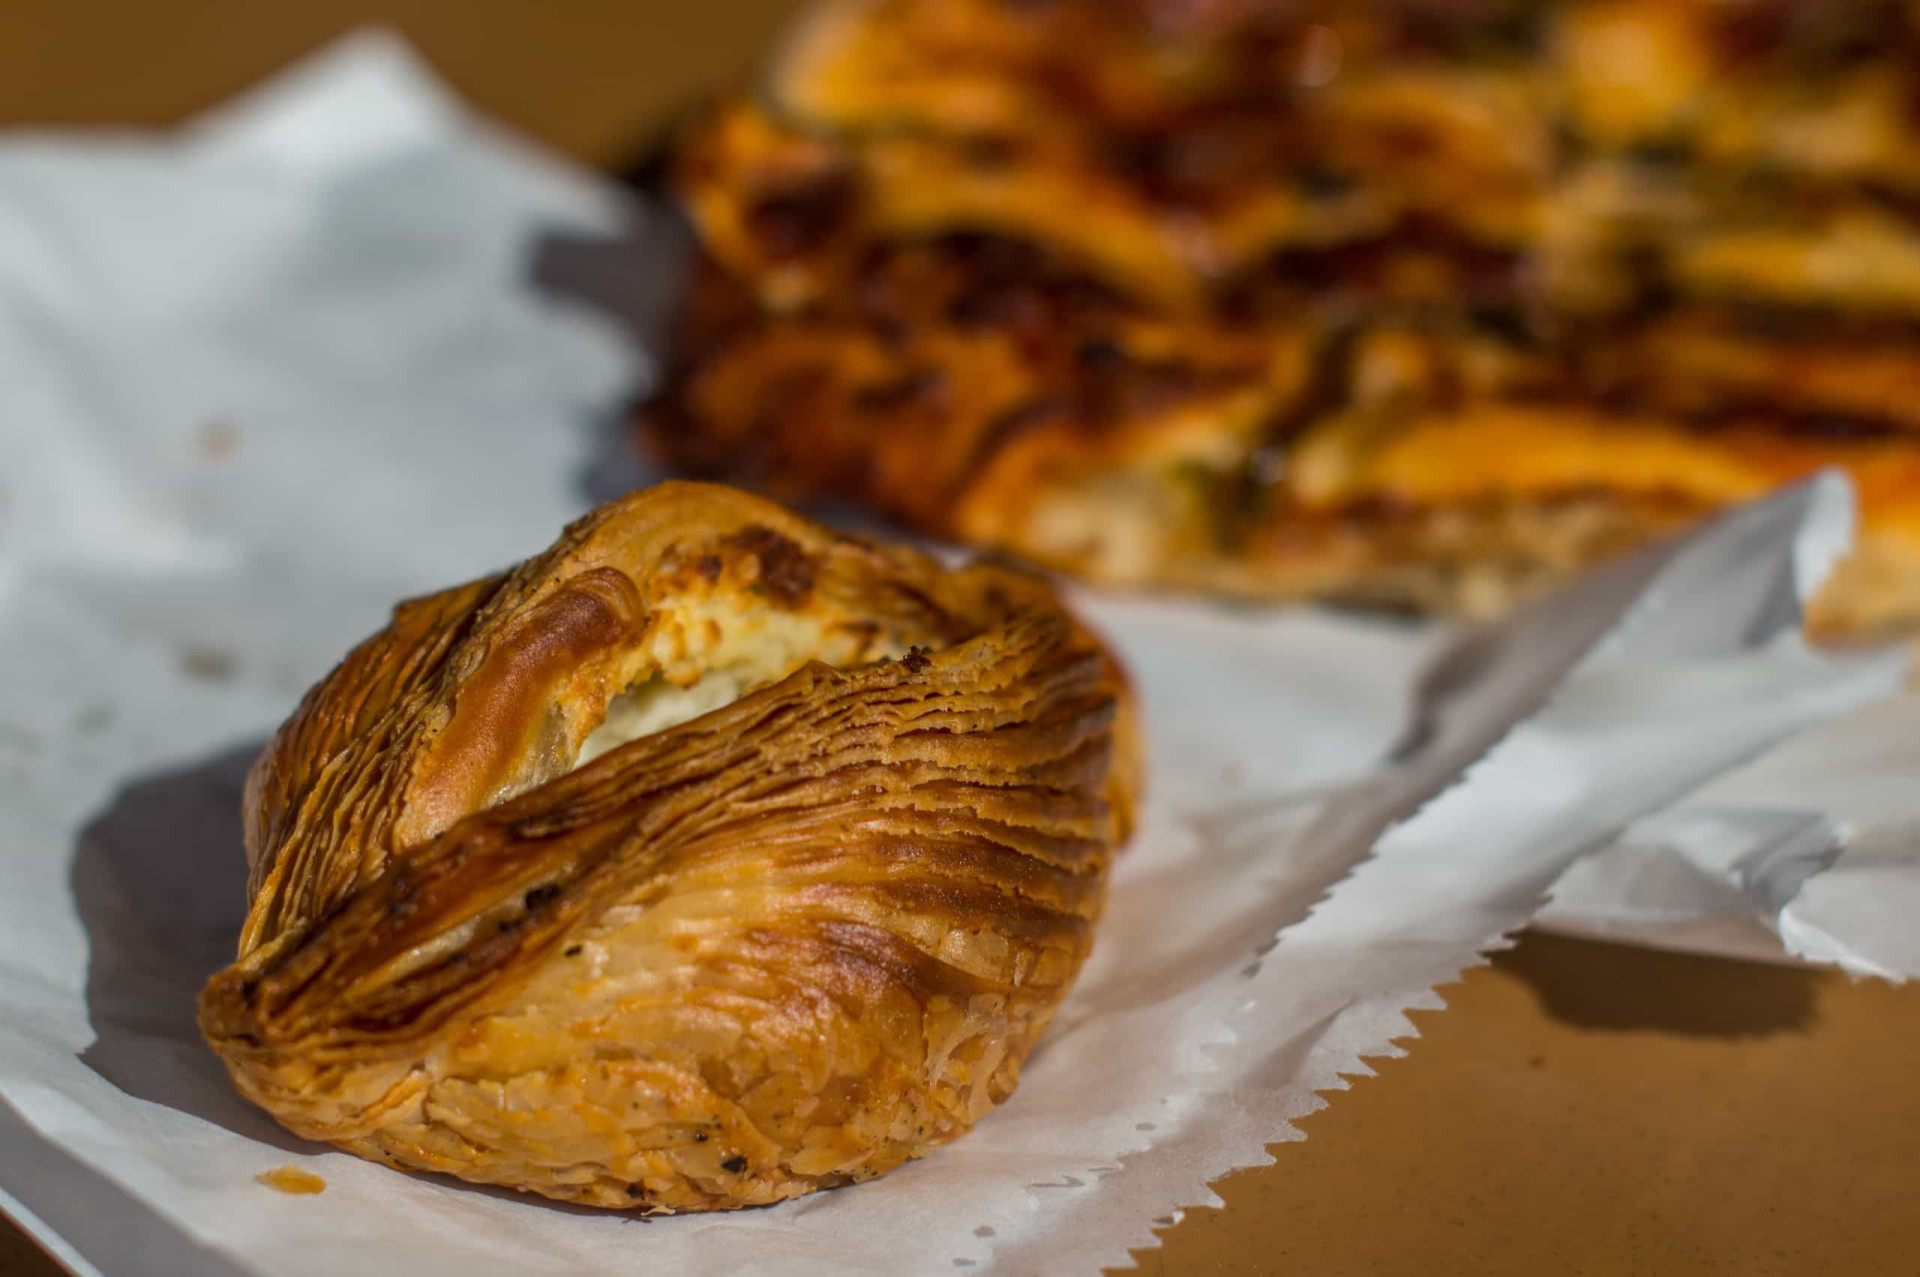 Among the various pastries, pies, pastas, and pizza slices available on the street, the famous pastizzi deserves its own moment. The <a href="https://uk.starsinsider.com/food/383595/mouth-watering-dumplings-from-around-the-world">crispy, baked pockets</a> are usually filled with ricotta or peas. To wash it down, use Malta’s own soft drink, Kinnie, which is said to be an acquired taste.<p><a href="https://www.msn.com/en-us/community/channel/vid-7xx8mnucu55yw63we9va2gwr7uihbxwc68fxqp25x6tg4ftibpra?cvid=94631541bc0f4f89bfd59158d696ad7e">Follow us and access great exclusive content every day</a></p>